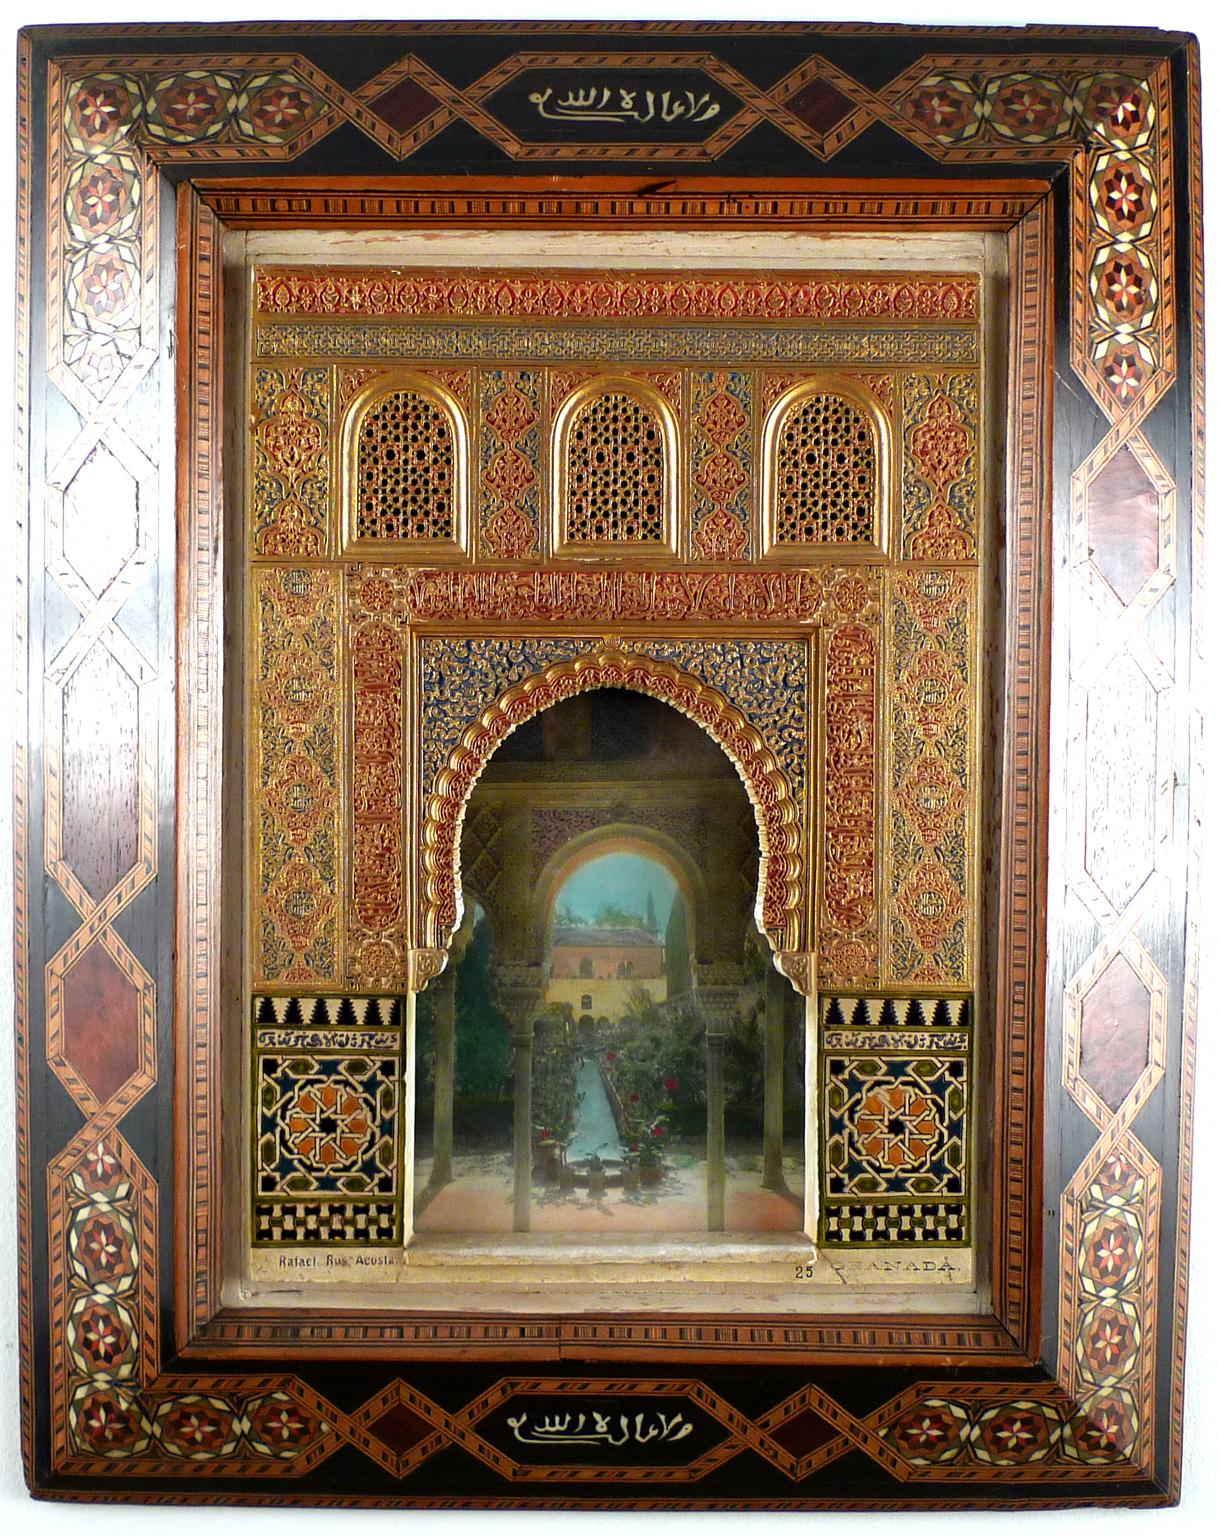 "Alhambra Facade Model", Early 20th Century Polychromed Stucco Plaque by R. Rus  - Sculpture by Rafael Rus Acosta